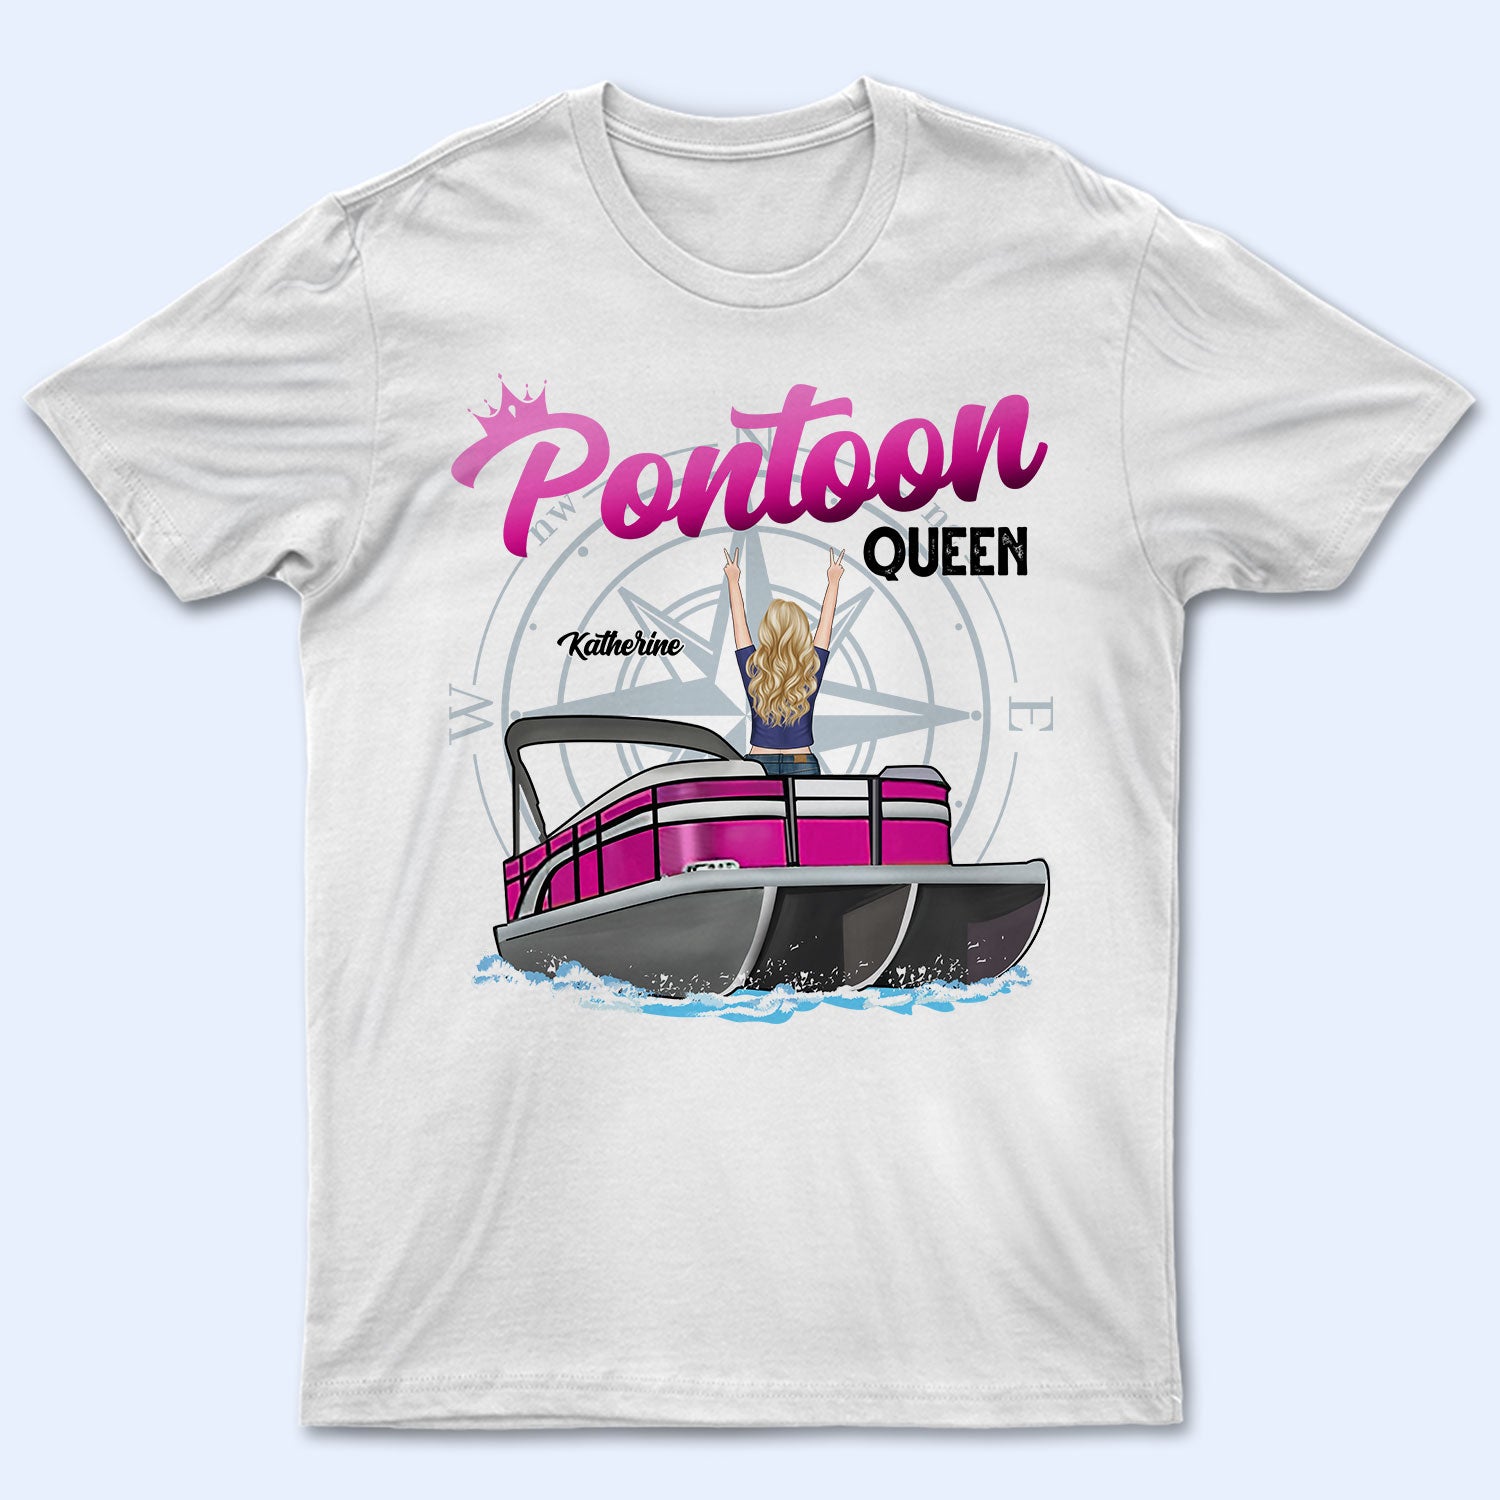 Pontoon Boat Queen - Birthday, Traveling, Cruising Gift For Lake Beach Lovers, Travelers - Personalized Custom T Shirt